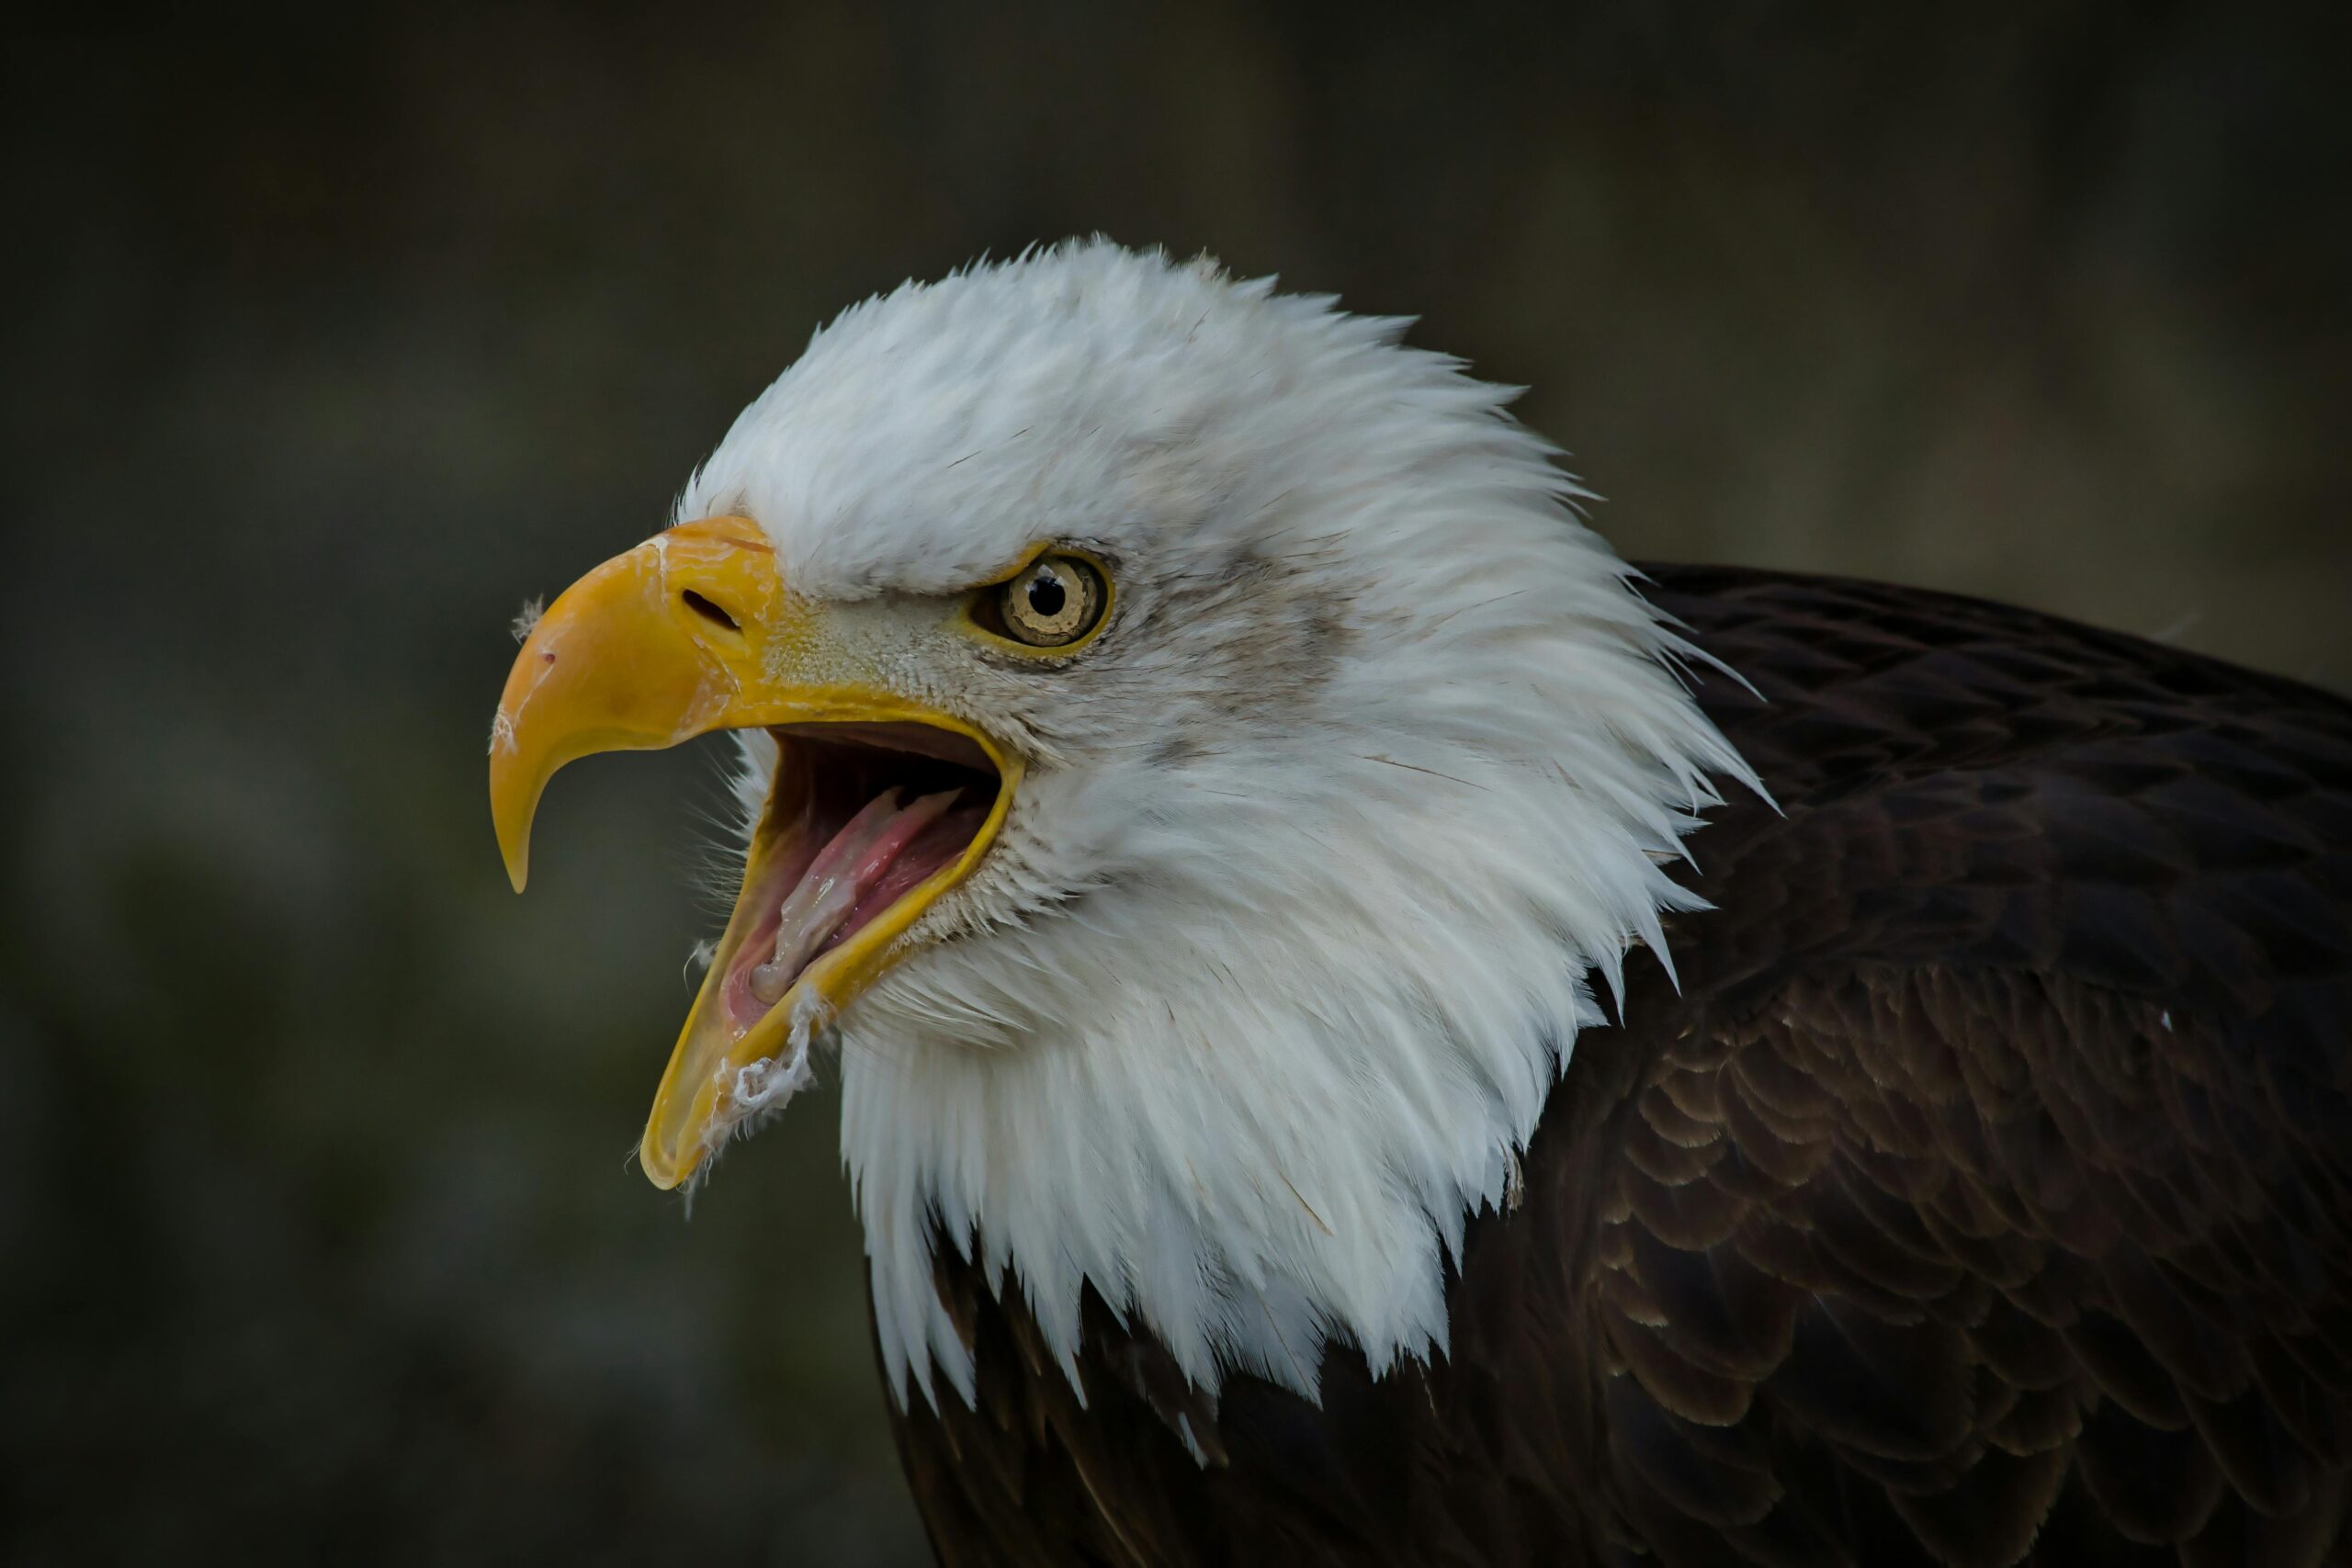 how far can bald eagles see